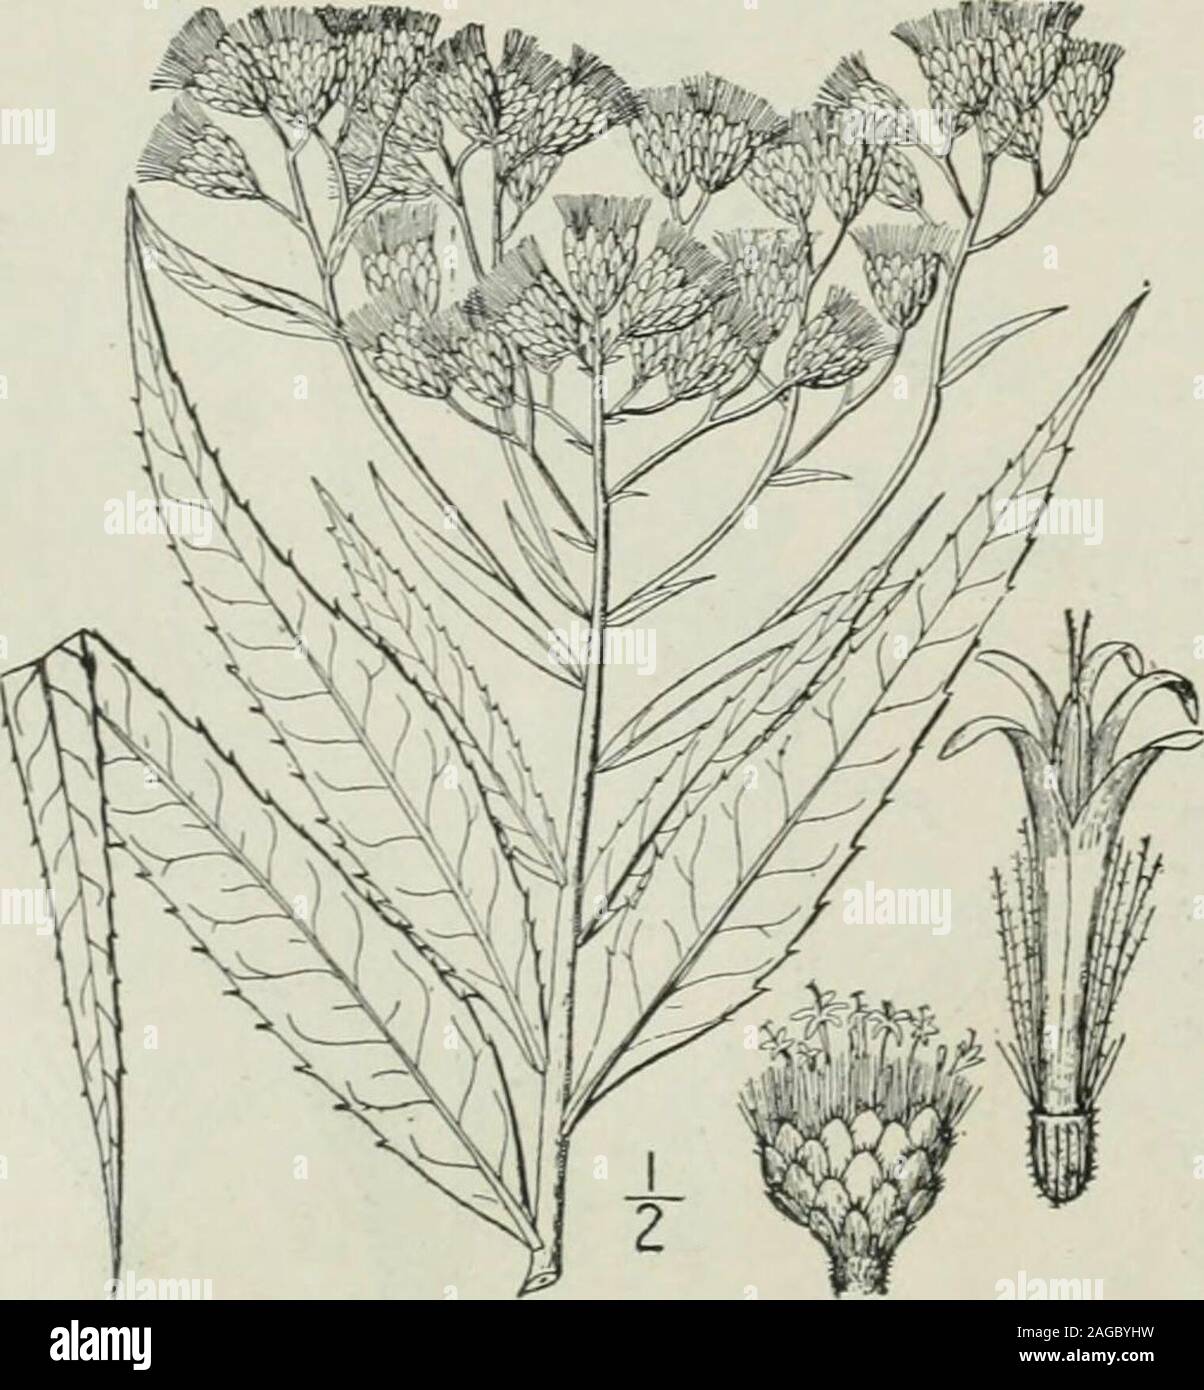 . An illustrated flora of the northern United States, Canada and the British possessions : from Newfoundland to the parallel of the southern boundary of Virginia and from the Atlantic Ocean westward to the 102nd meridian. 6. Vernonia fasciculata Michx.Western Iron-weed. Fig. 4145. Vernonia fasciculata Michx. Fl. Bor. Am. 2:94. 1803. Cacalia fasciculata Kuntze, Rev. Gen. PI. 970.1891. Glabrous, or puberulent above, 2°-6° high.Leaves firm, lanceolate or linear-lanceolate,long-acuminate, 3-6 long, 2-4 wide, gla-brous or nearly so on both surfaces; inflor-escence usually compact; heads short-pedun Stock Photo